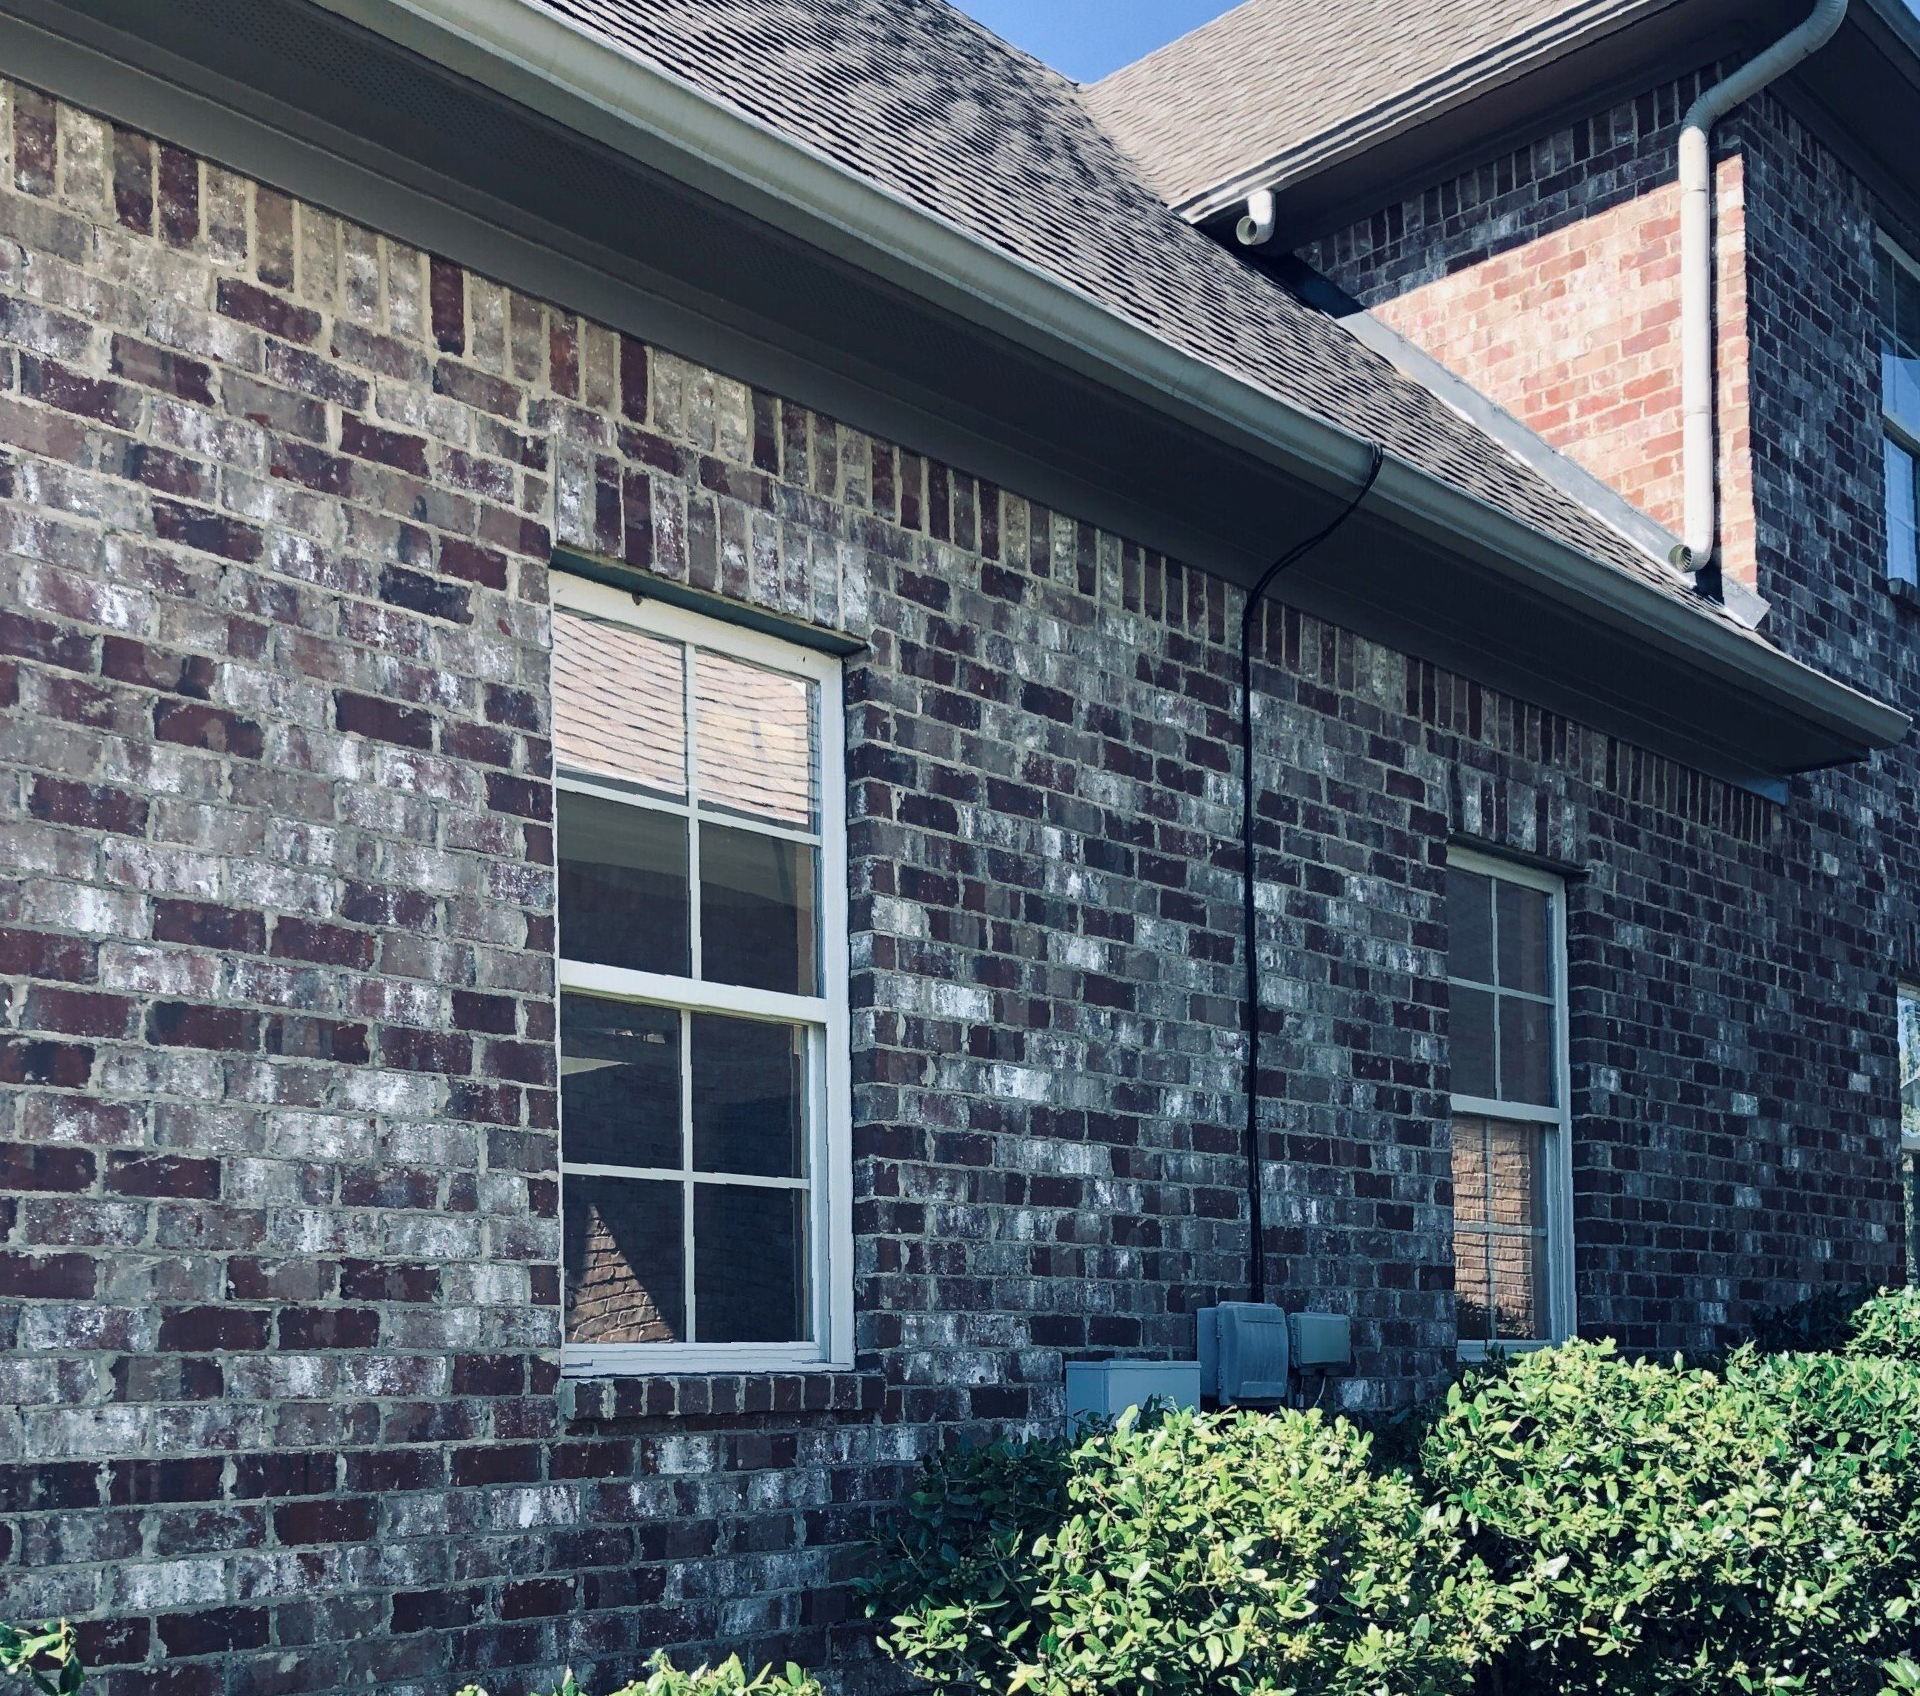 home window tinting in Birmingham, AL - SPF Residential Tint Blocked Heat & Glare from this Birmingham home. Fall 2020 in Birmingham, AL